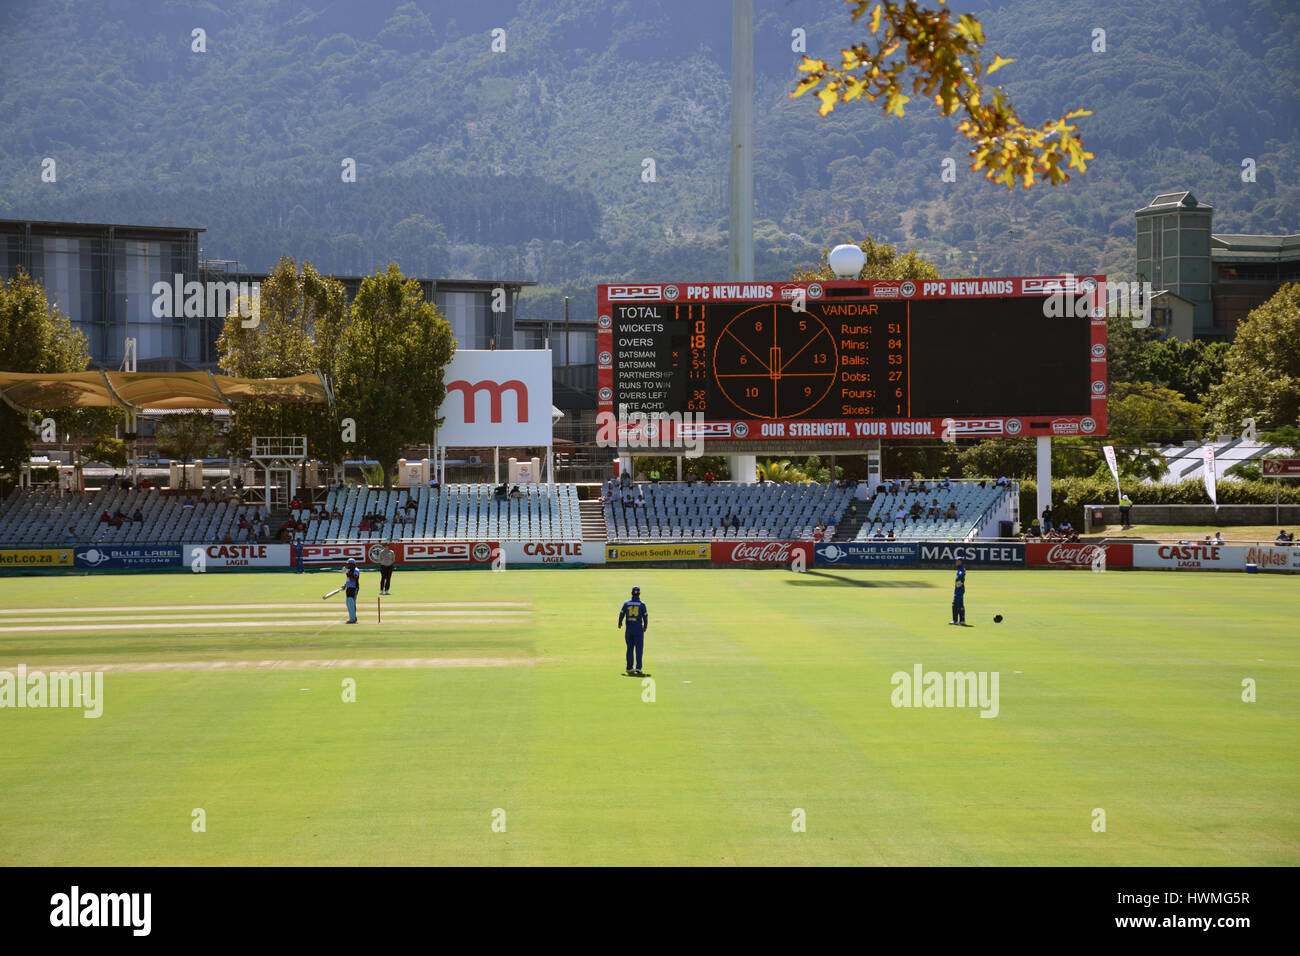 Newlands cricket ground, Cape Town, South Africa Stock Photo - Alamy